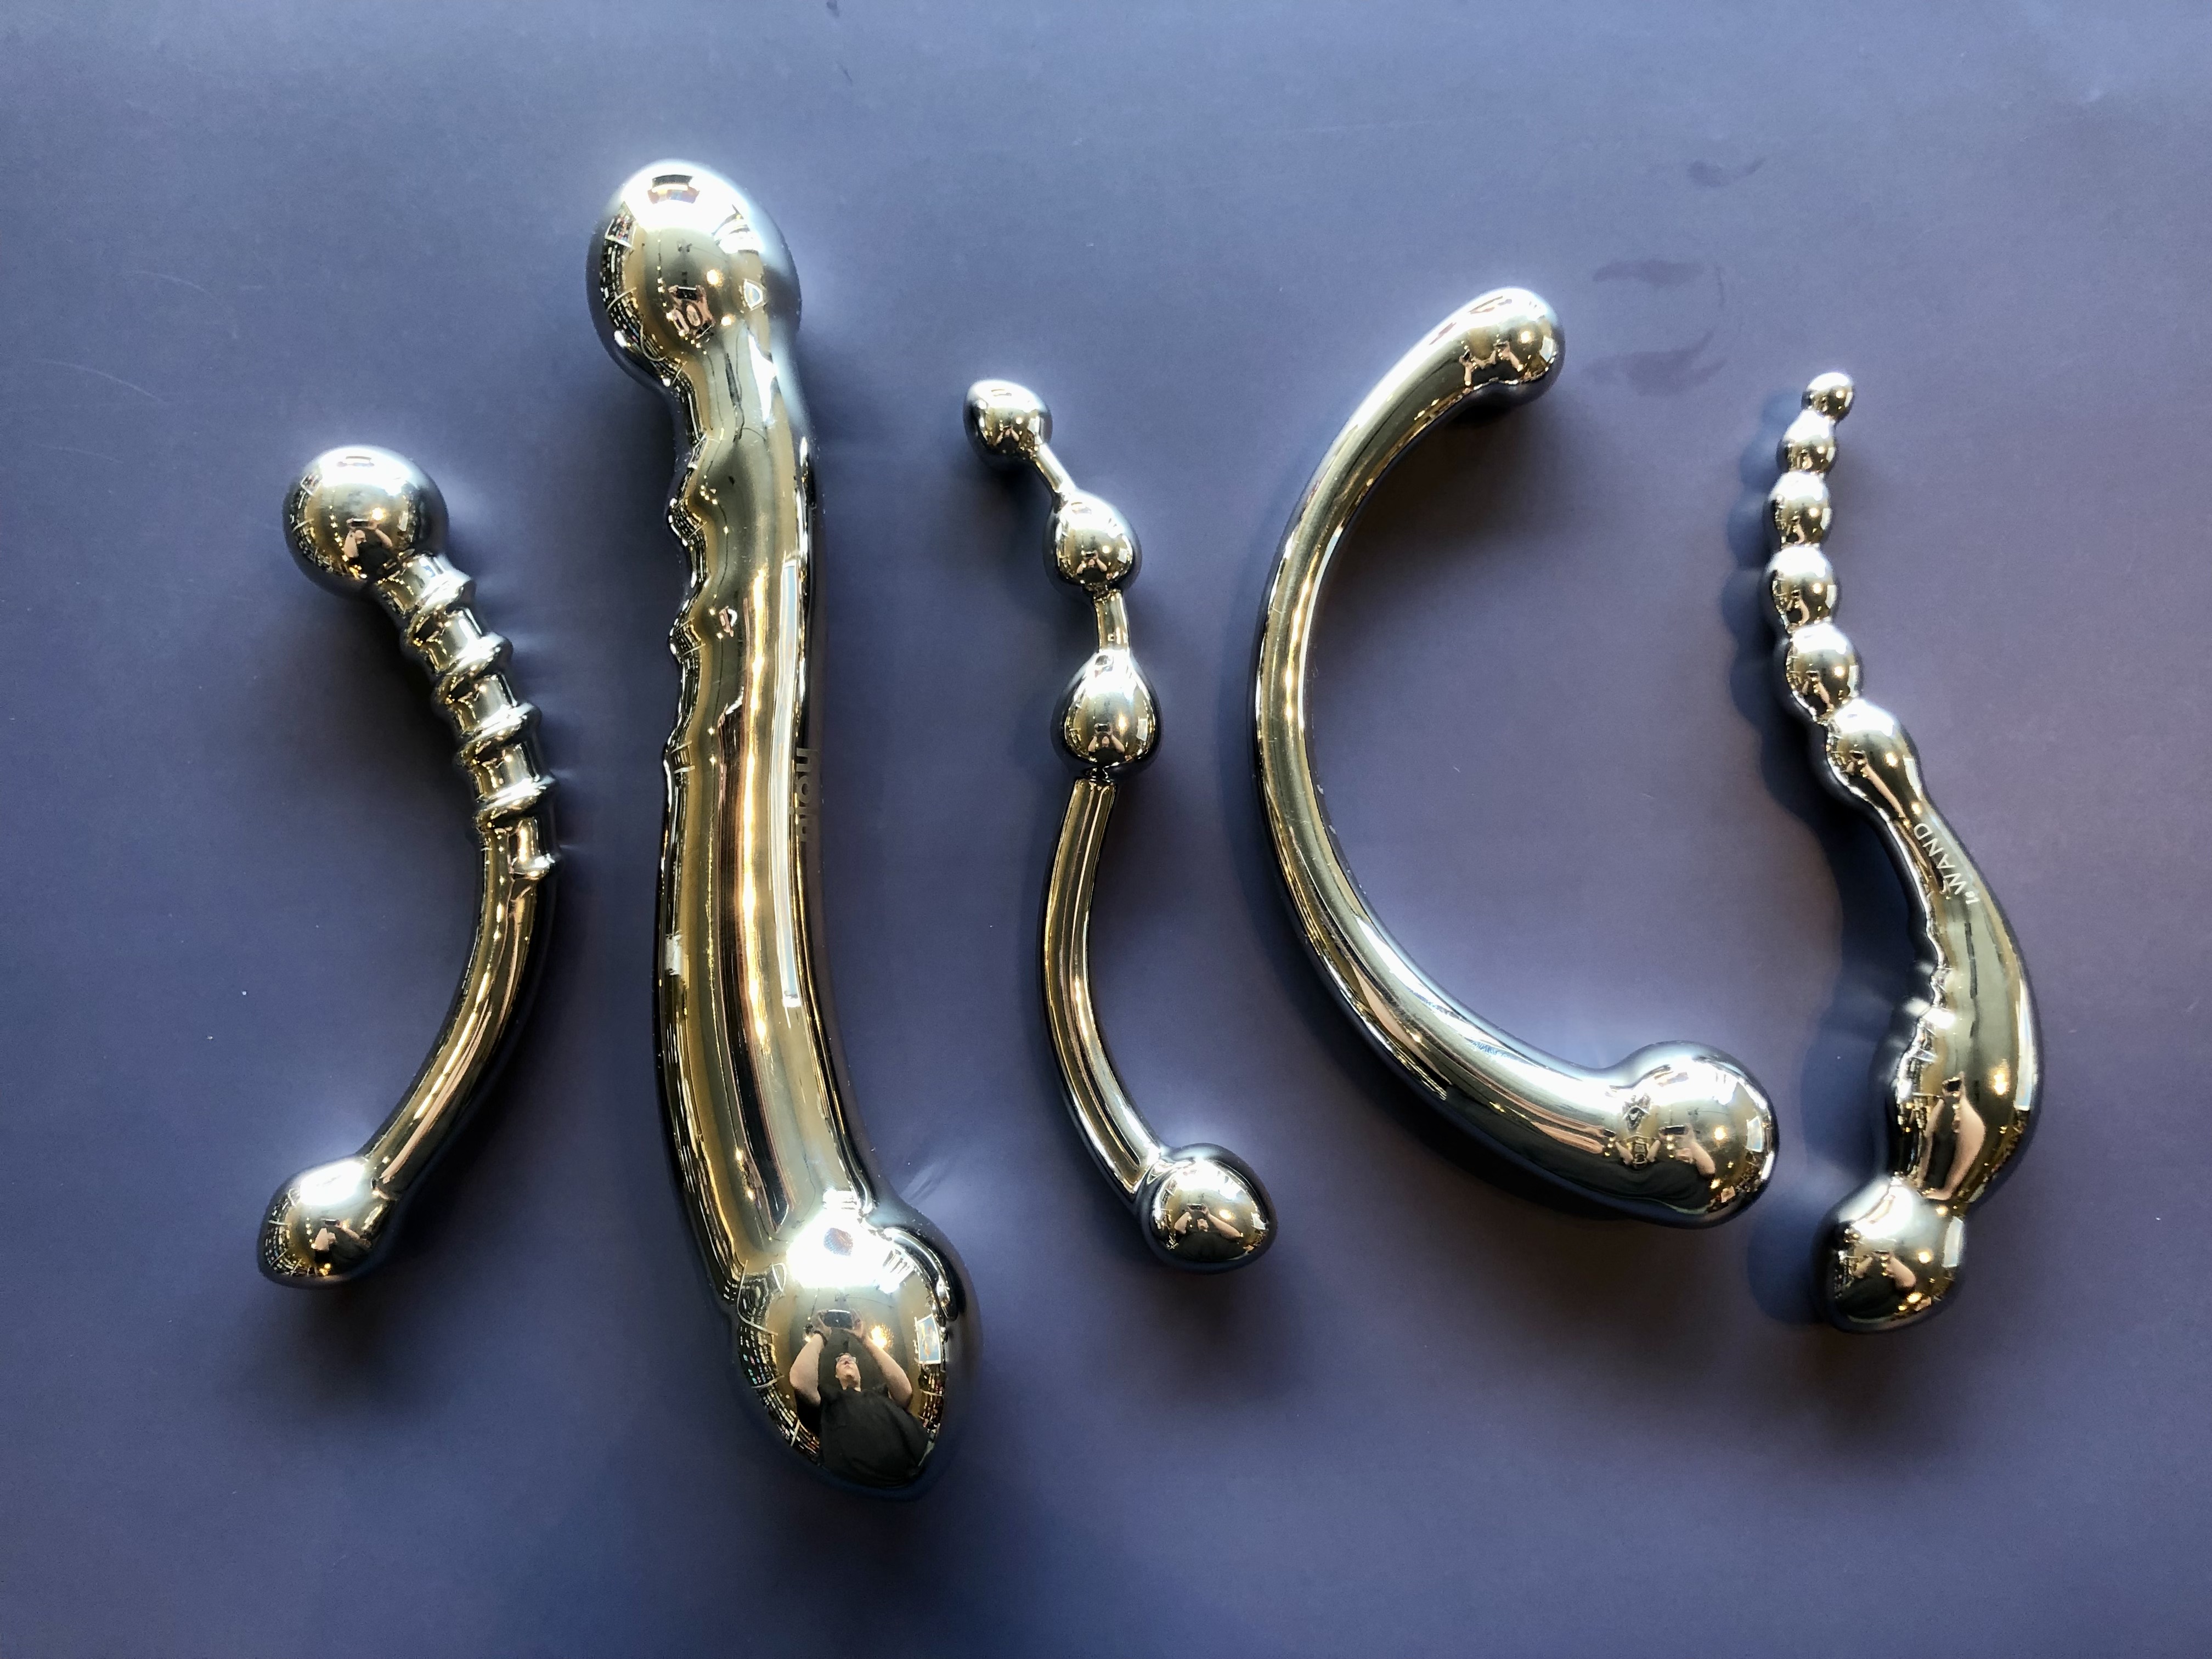 Multiple Stainless Steel Sex Toys